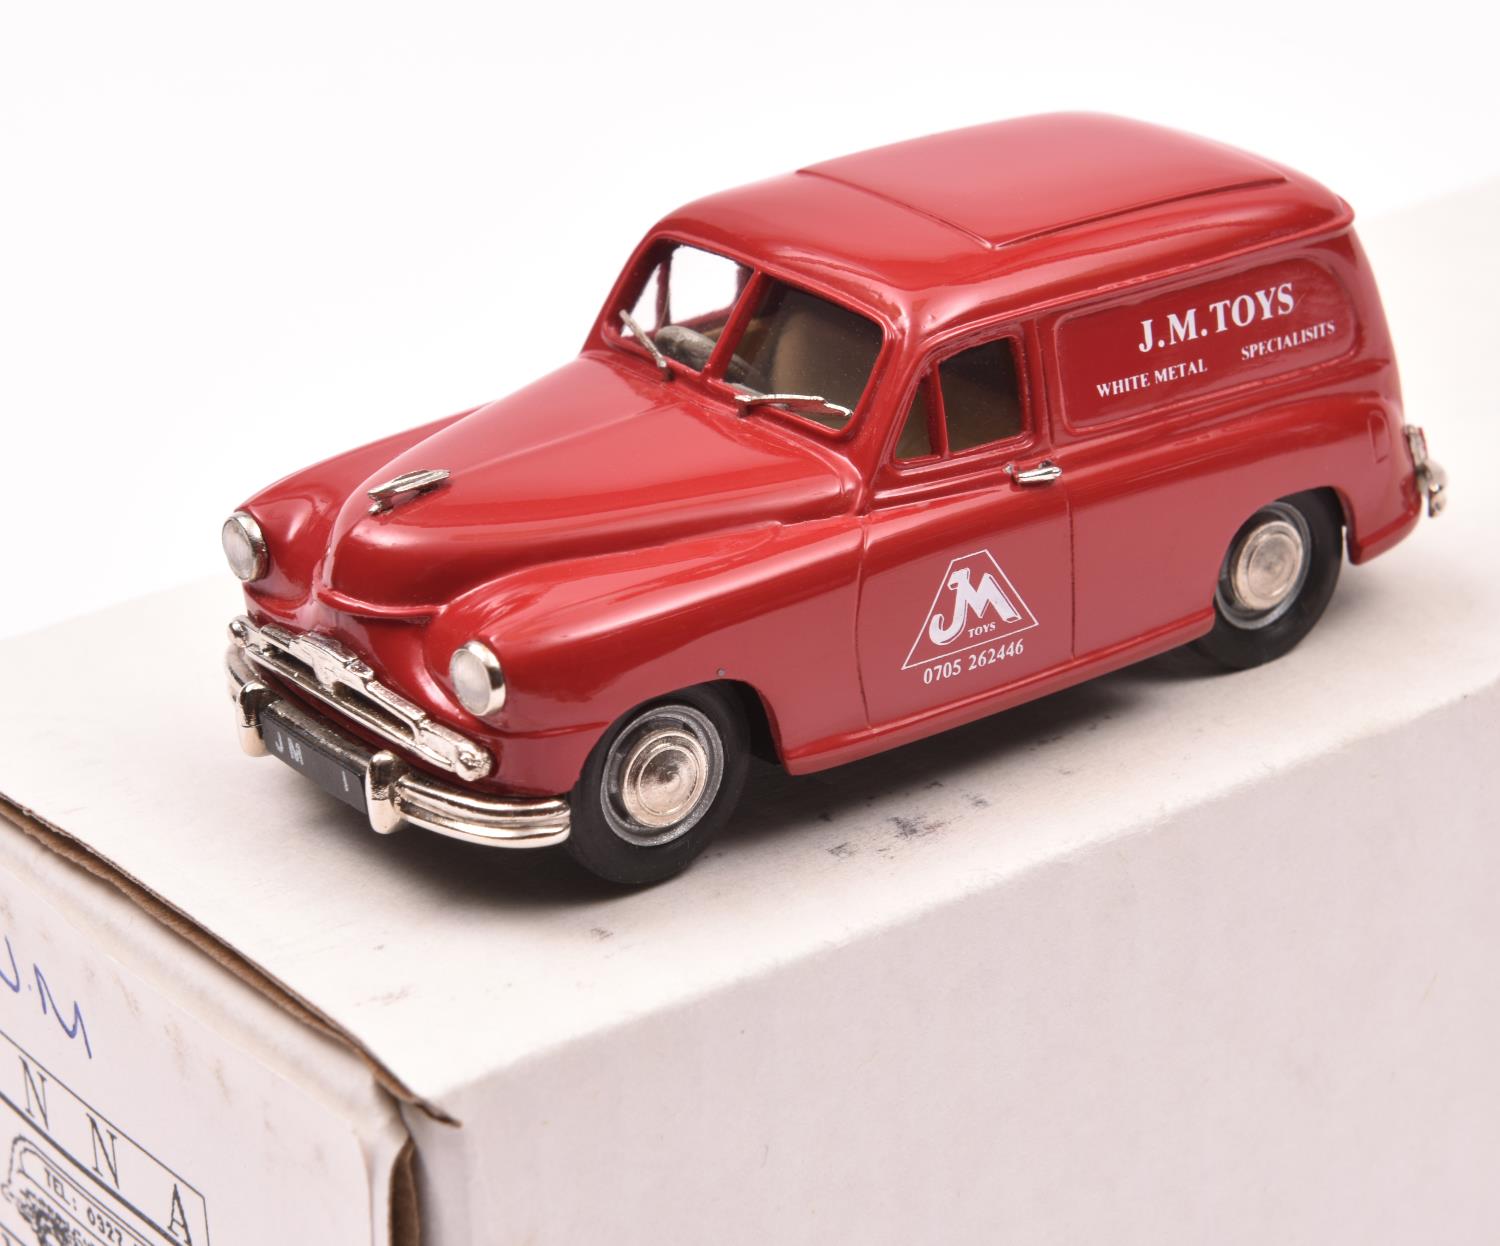 Kenna Models Standard Vanguard Van. A special edition in red J.M. Toys livery, with cream seats,